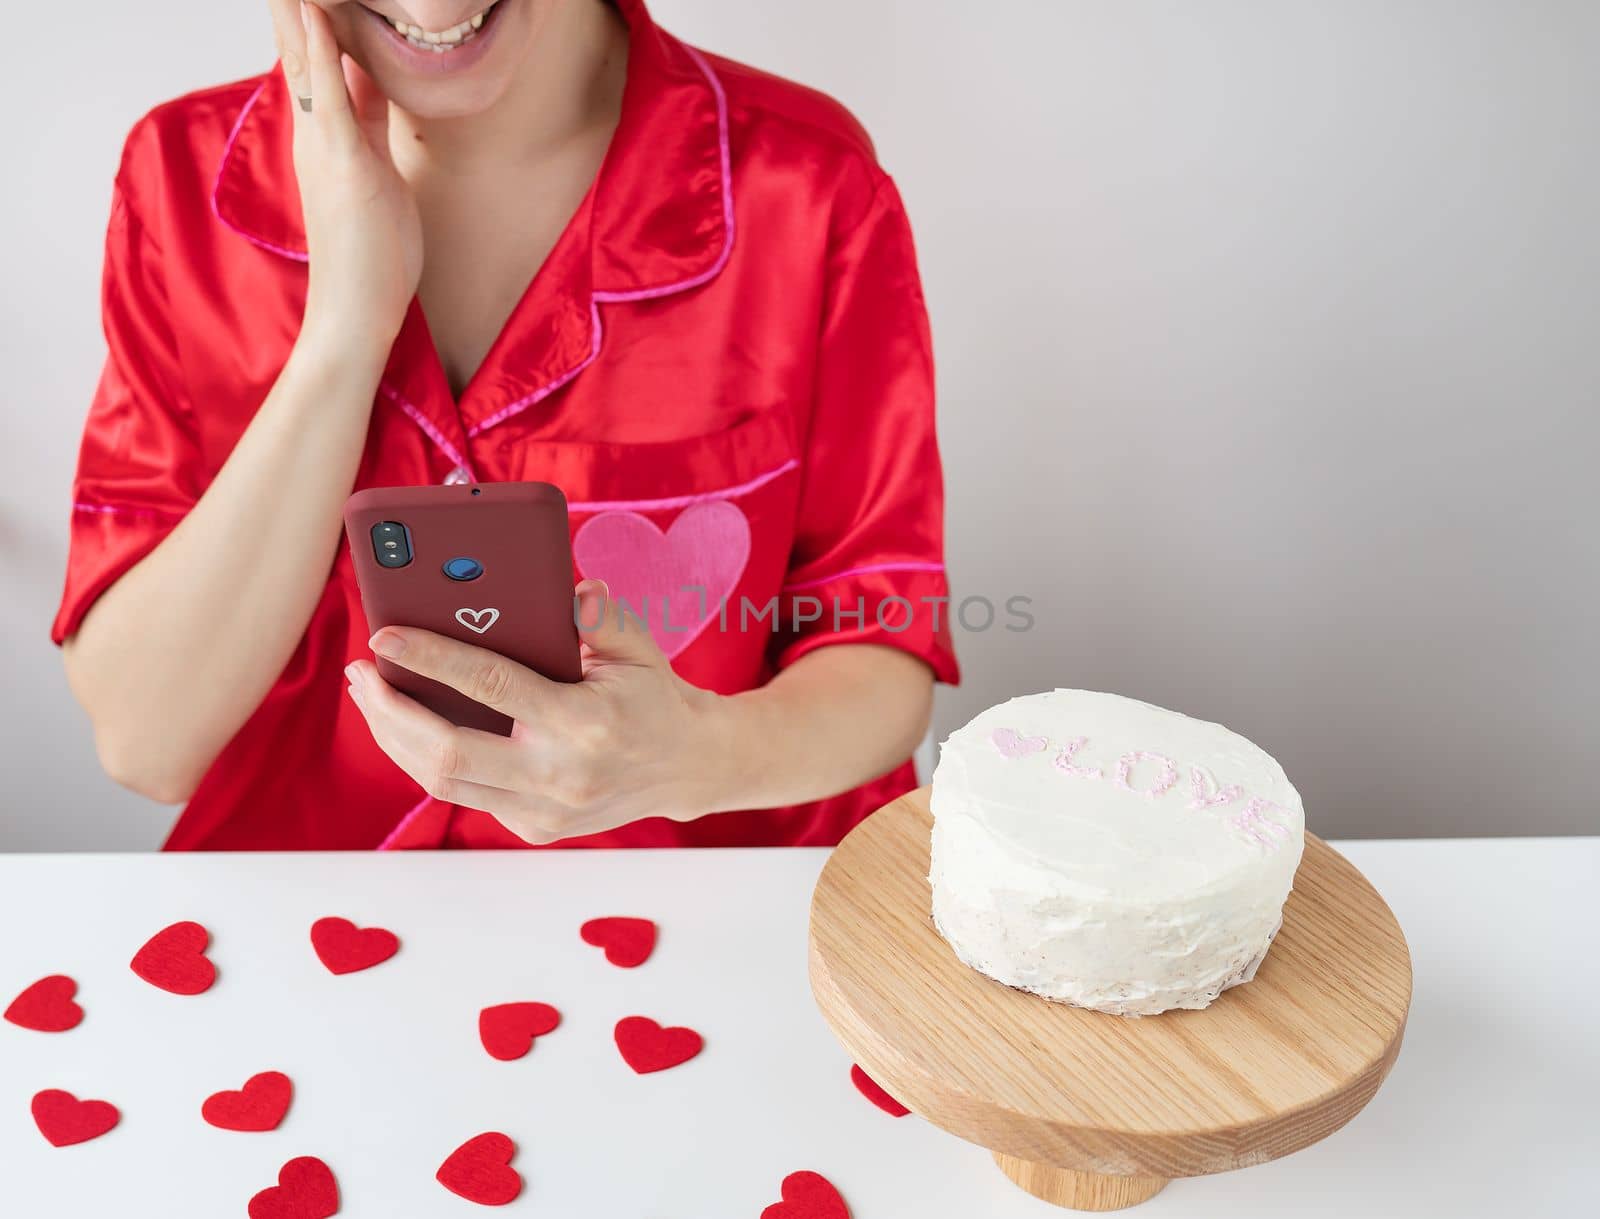 A happy girl in red clothes holds a smartphone in a cherry case with a heart and is happy with an SMS message from a loved one, a cake and small red hearts are on the table. Valentine's day and romantic date concept. by sfinks